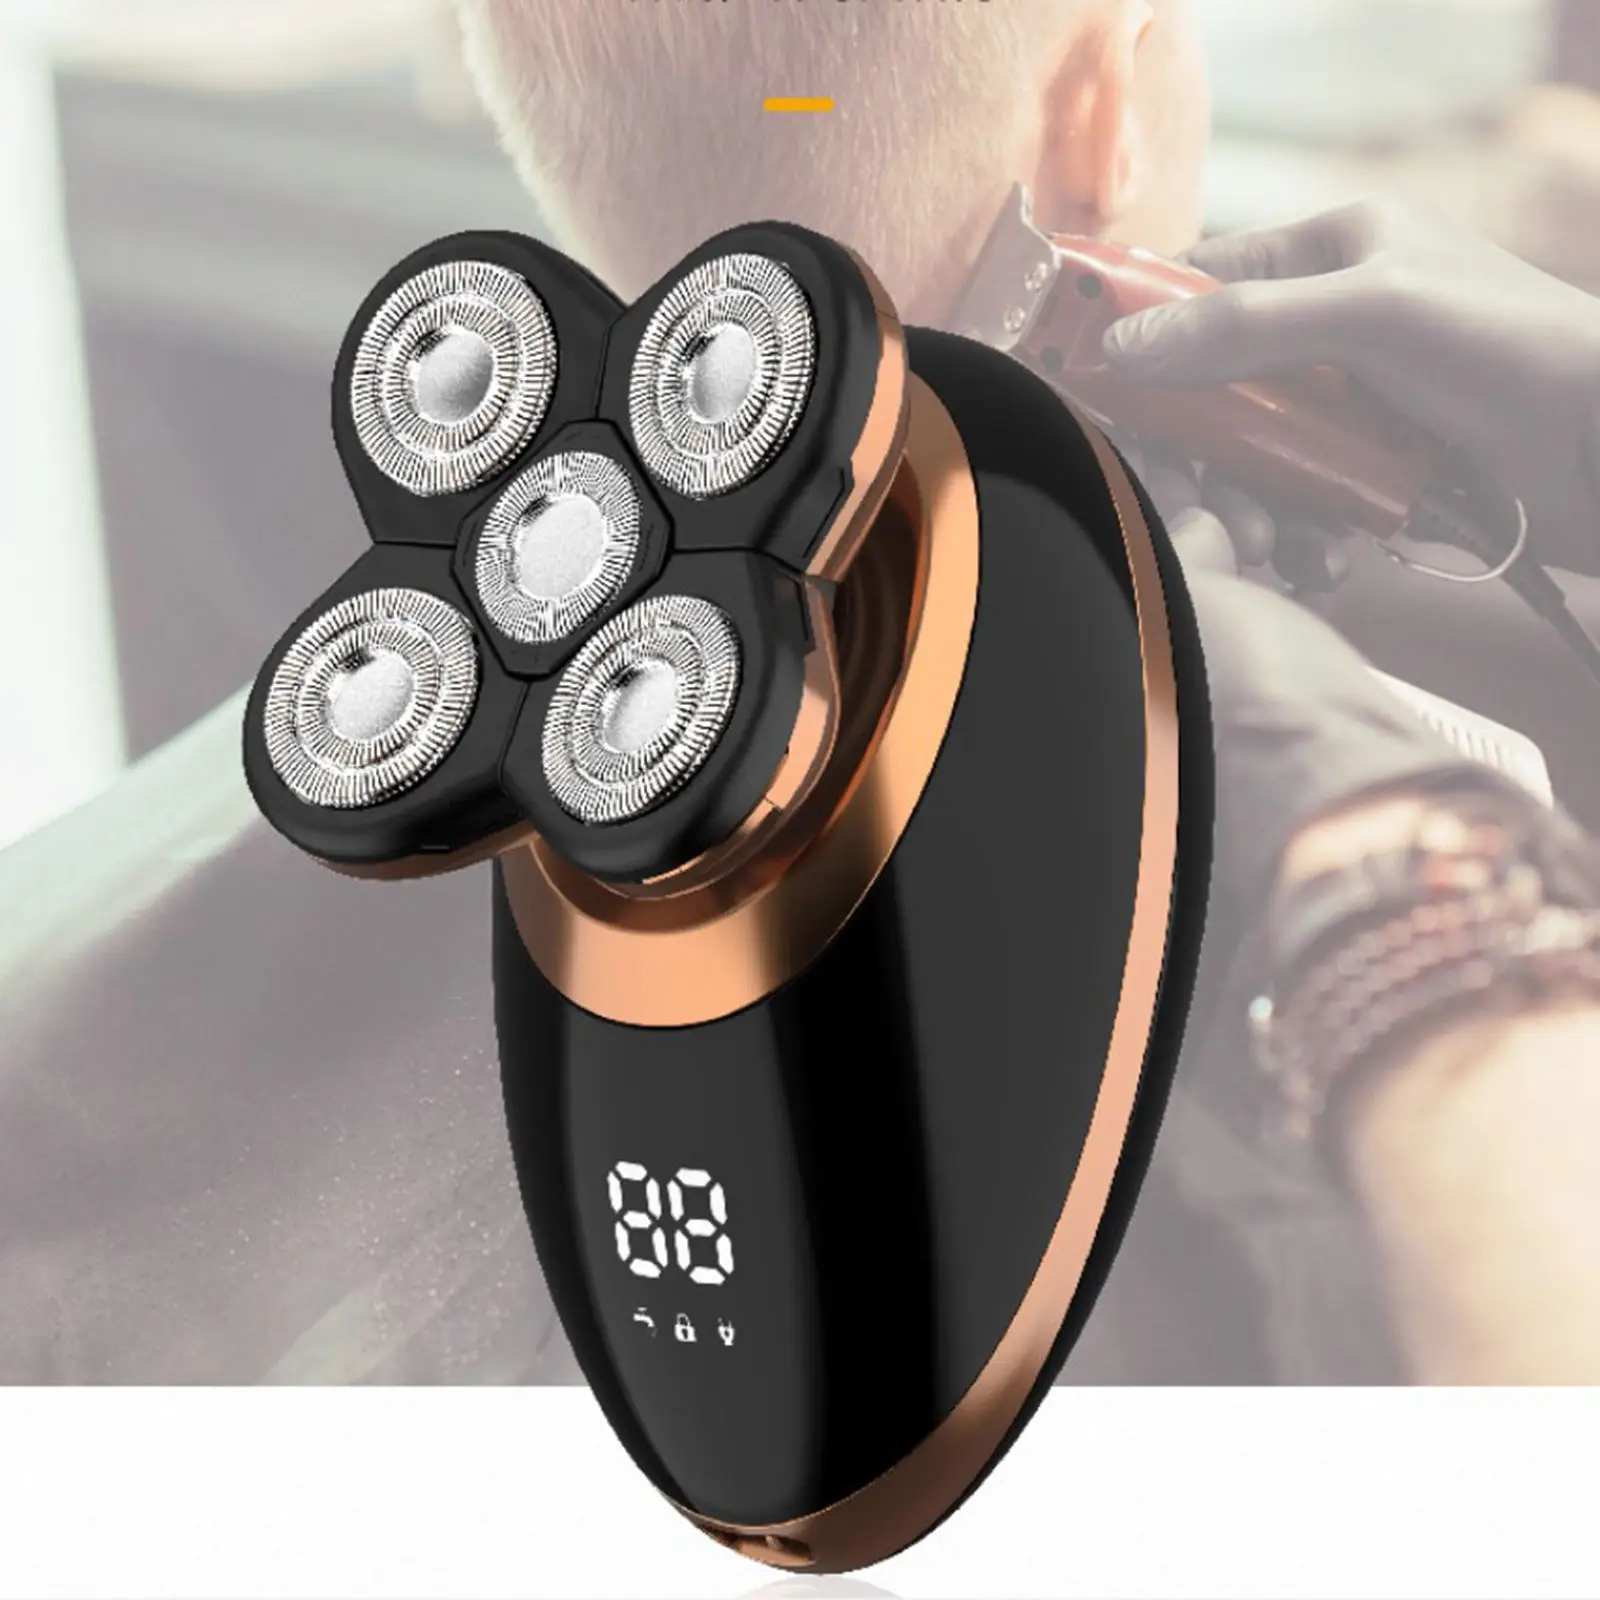 5 IN 1 Electric Shaver for Men USB Rechargeable Bald Head Hair Trimmer Shaving Machine Wet Dry Use LCD display